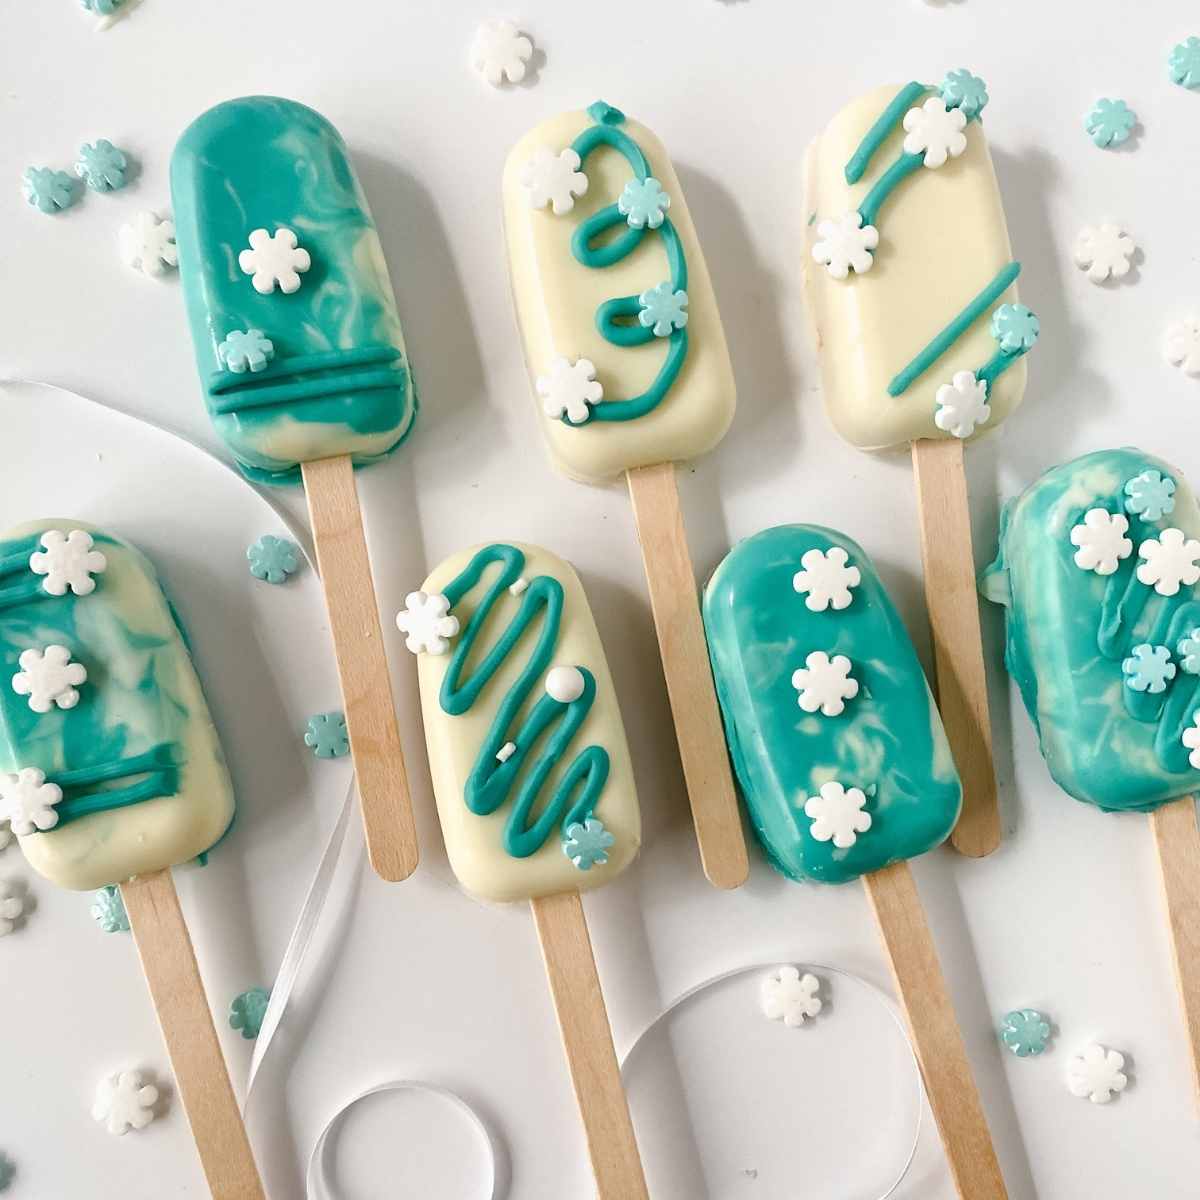 final product overview of winter wonderland cakesicles